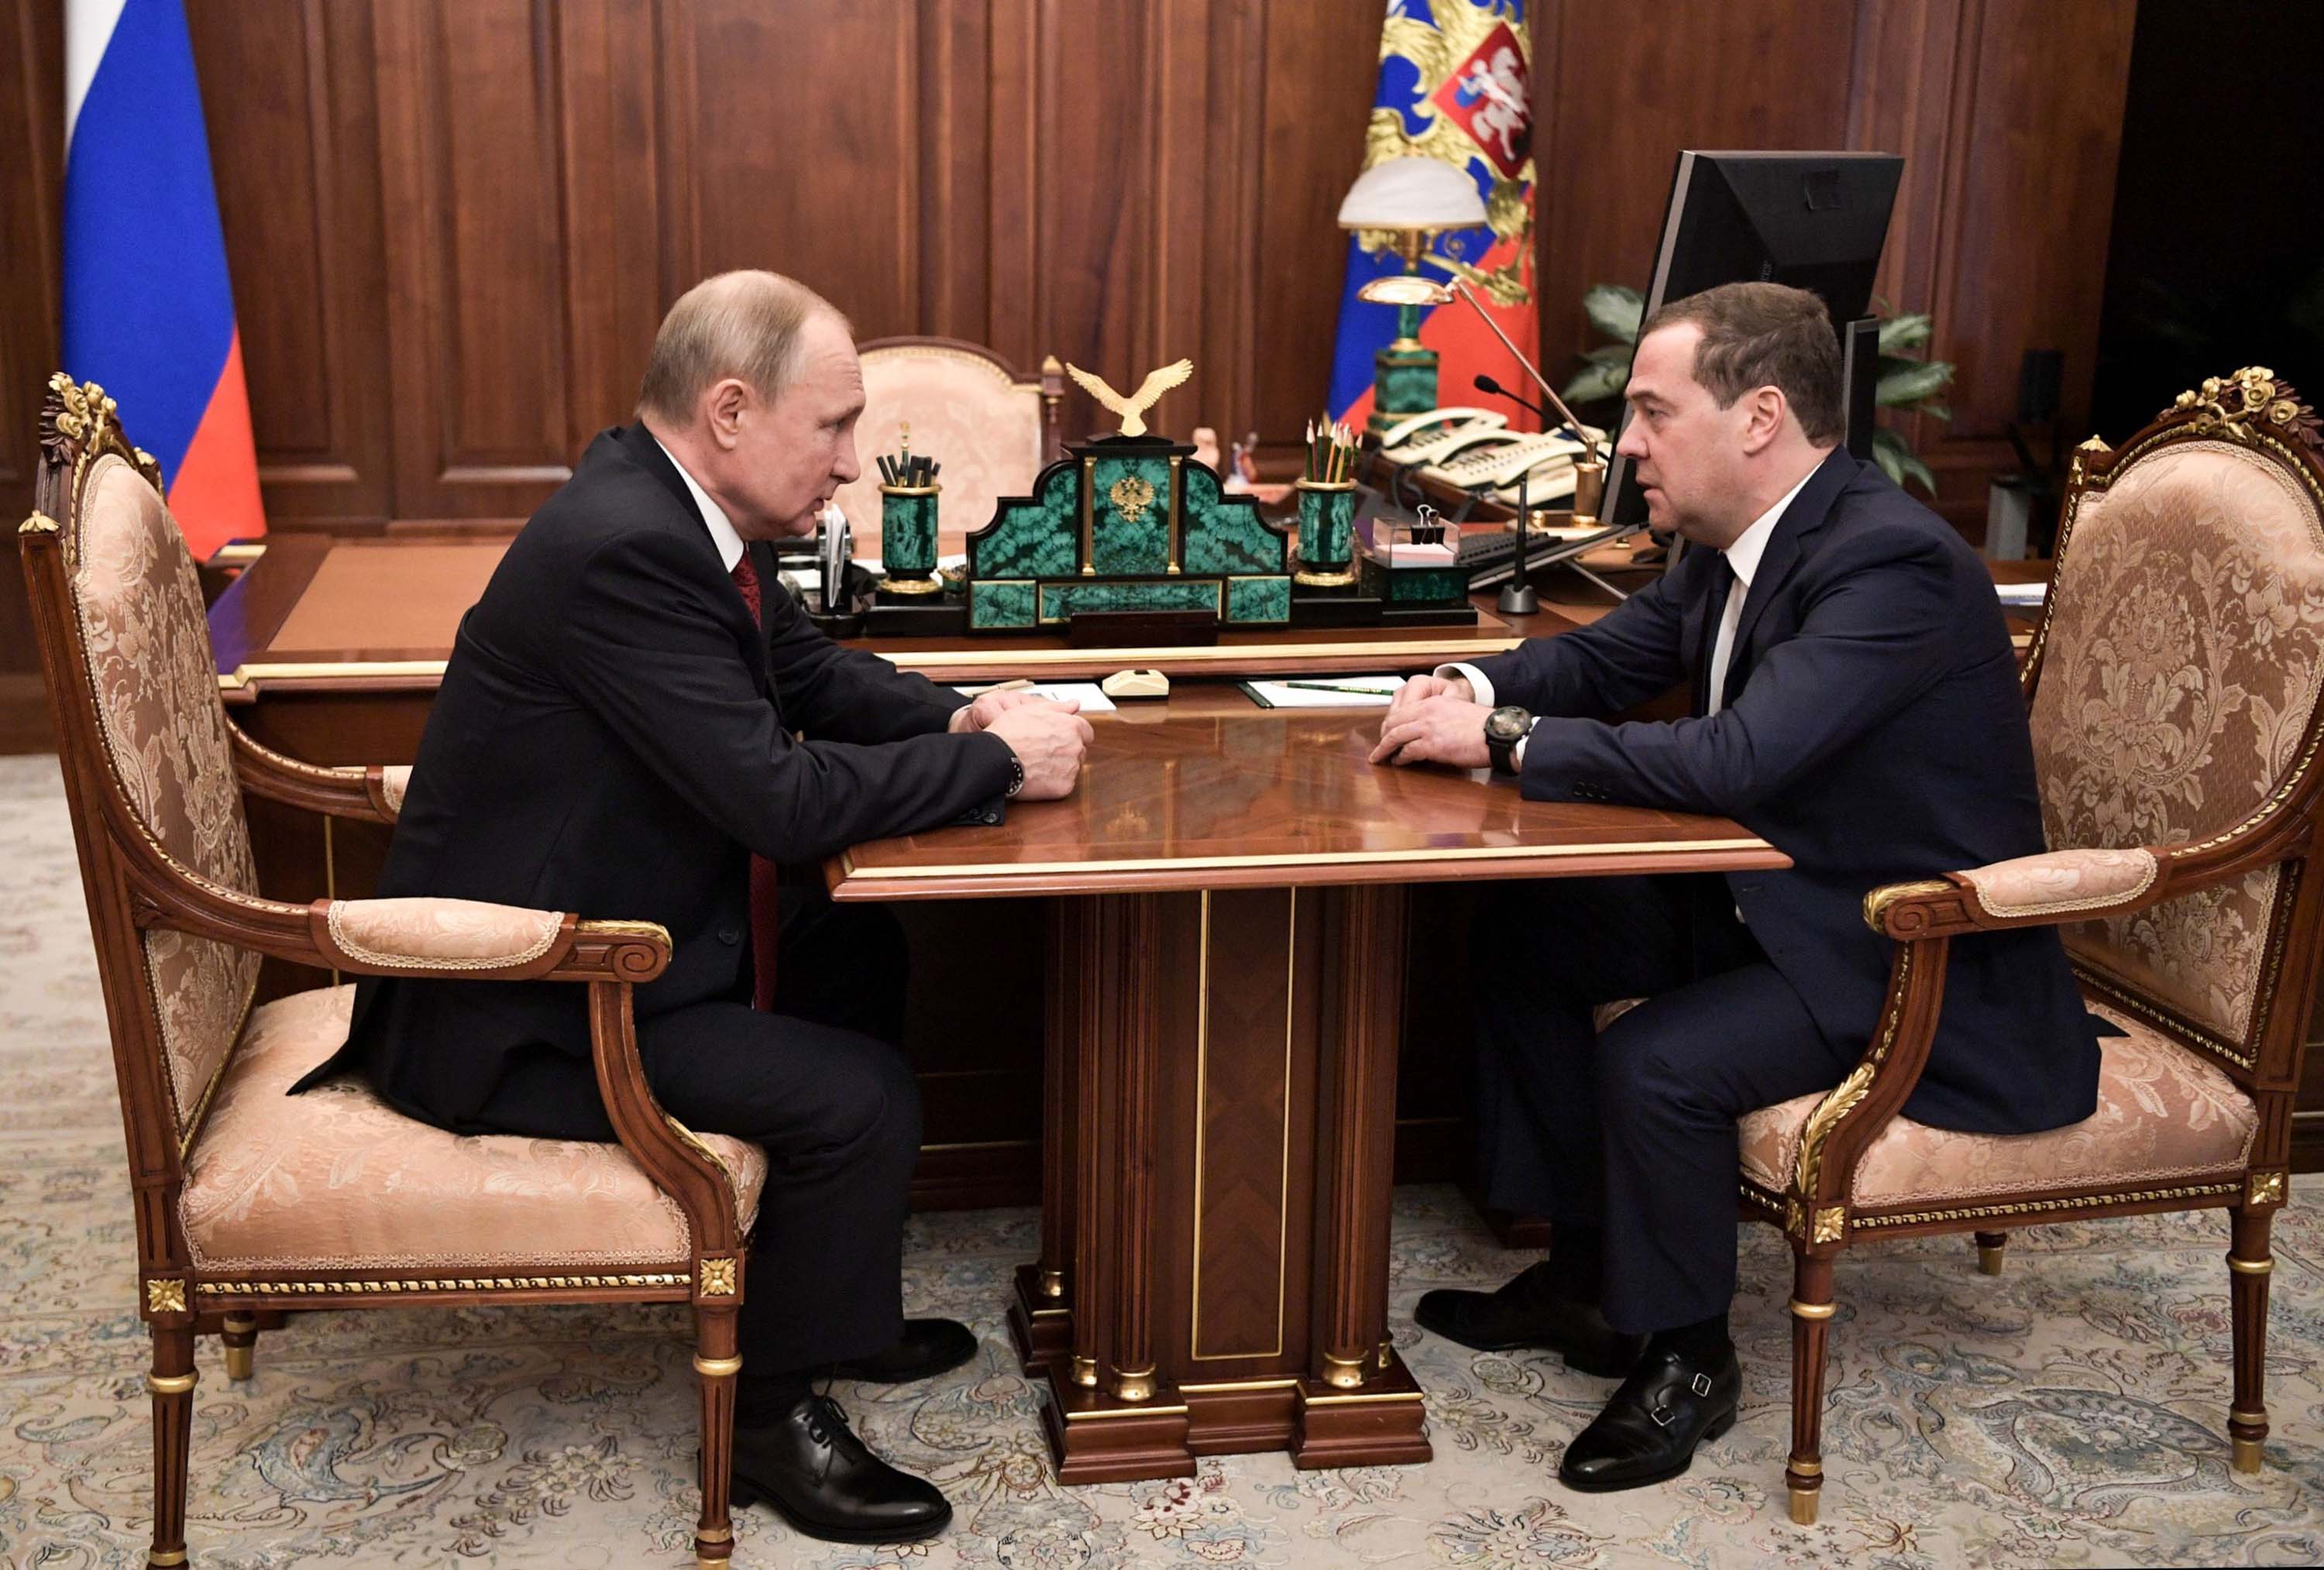 Russian President Vladimir Putin sits down with Prime Minister Dmitry Medvedev in Moscow on Wednesday.